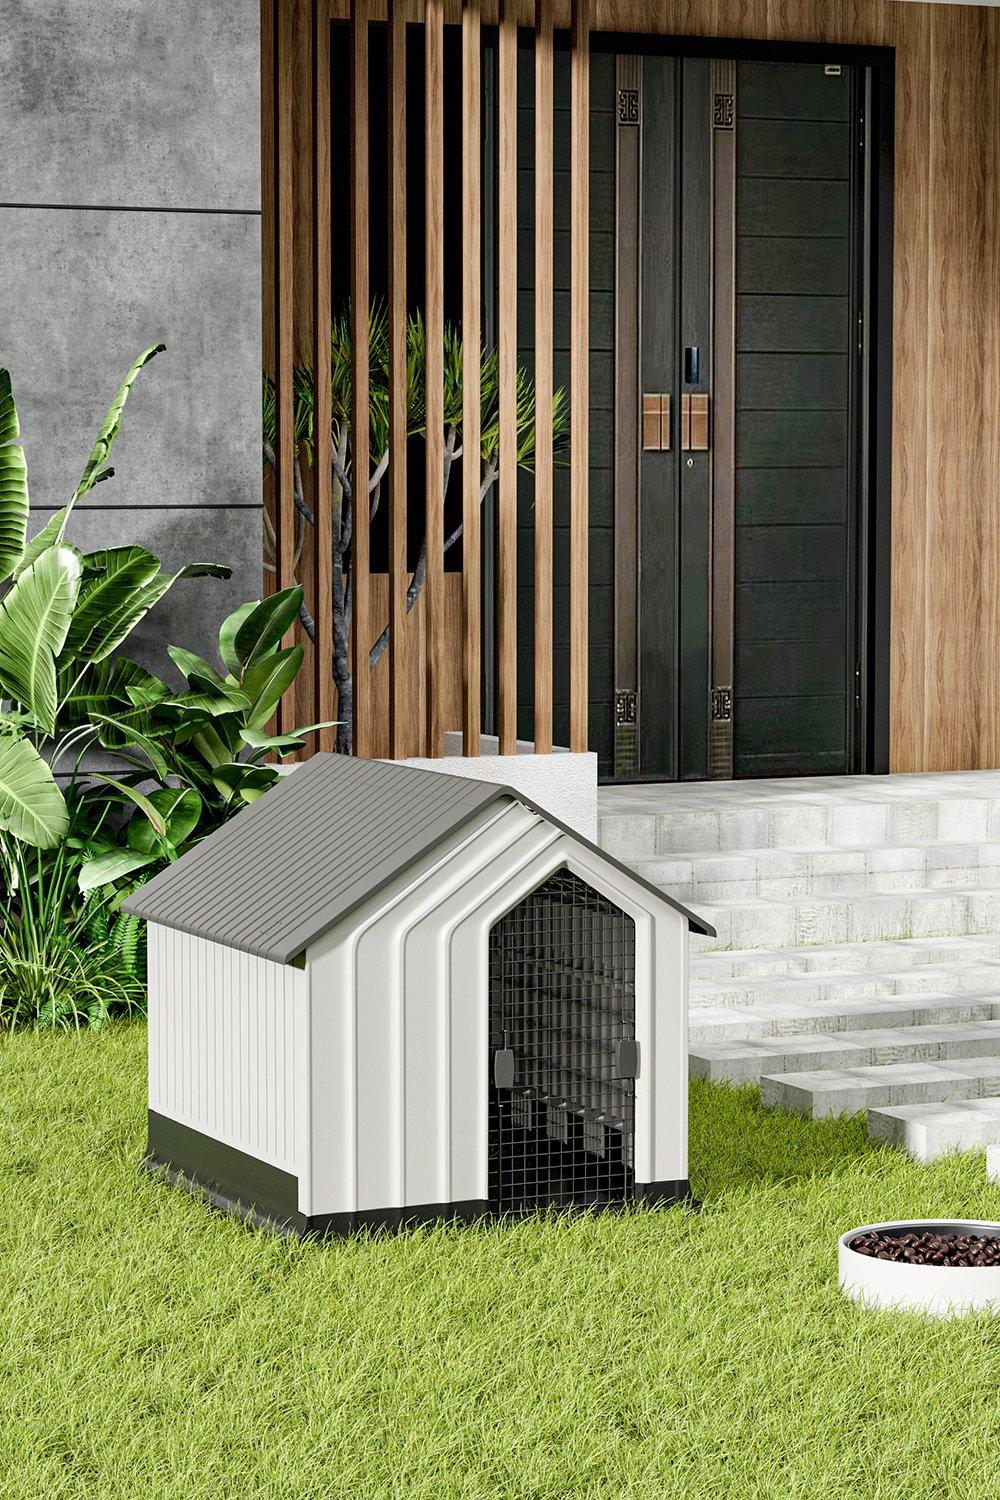 62*61*60cm Grey And White Waterproof Plastic Dog House Pet Kennel with Door